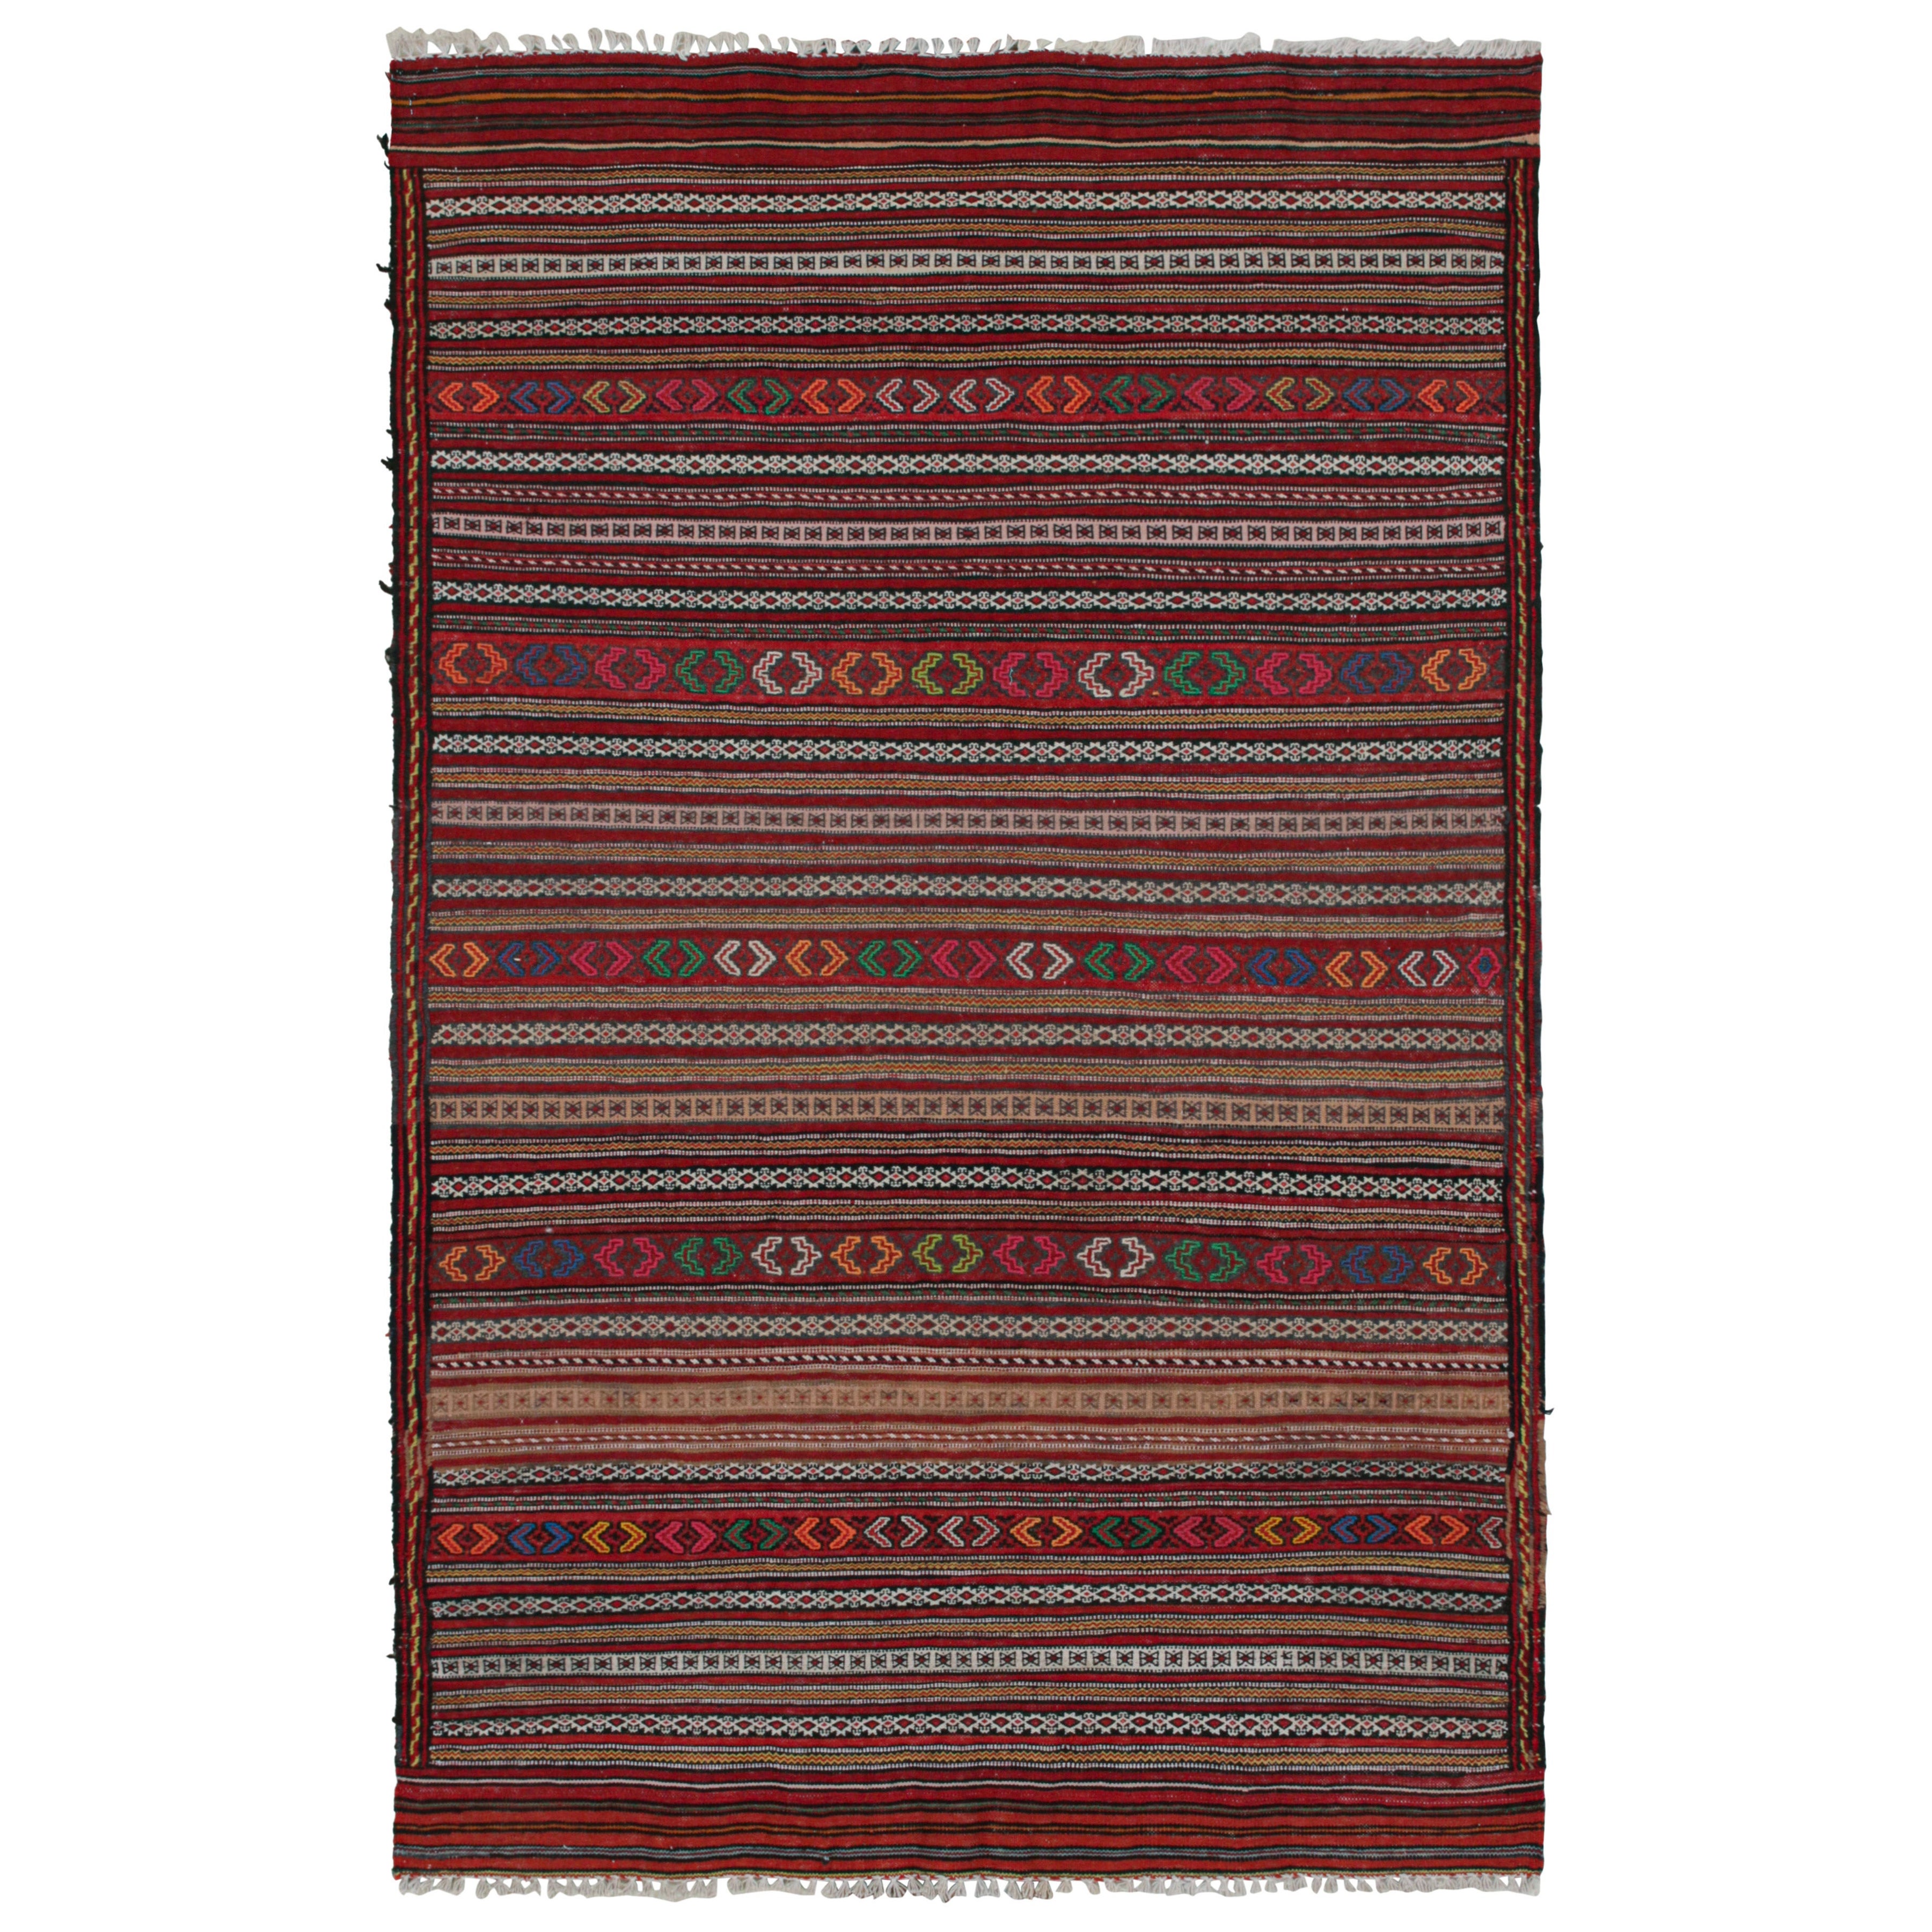 Vintage Baluch Kilim Rug in Red with Stripes and Tribal Motifs, from Rug & Kilim For Sale